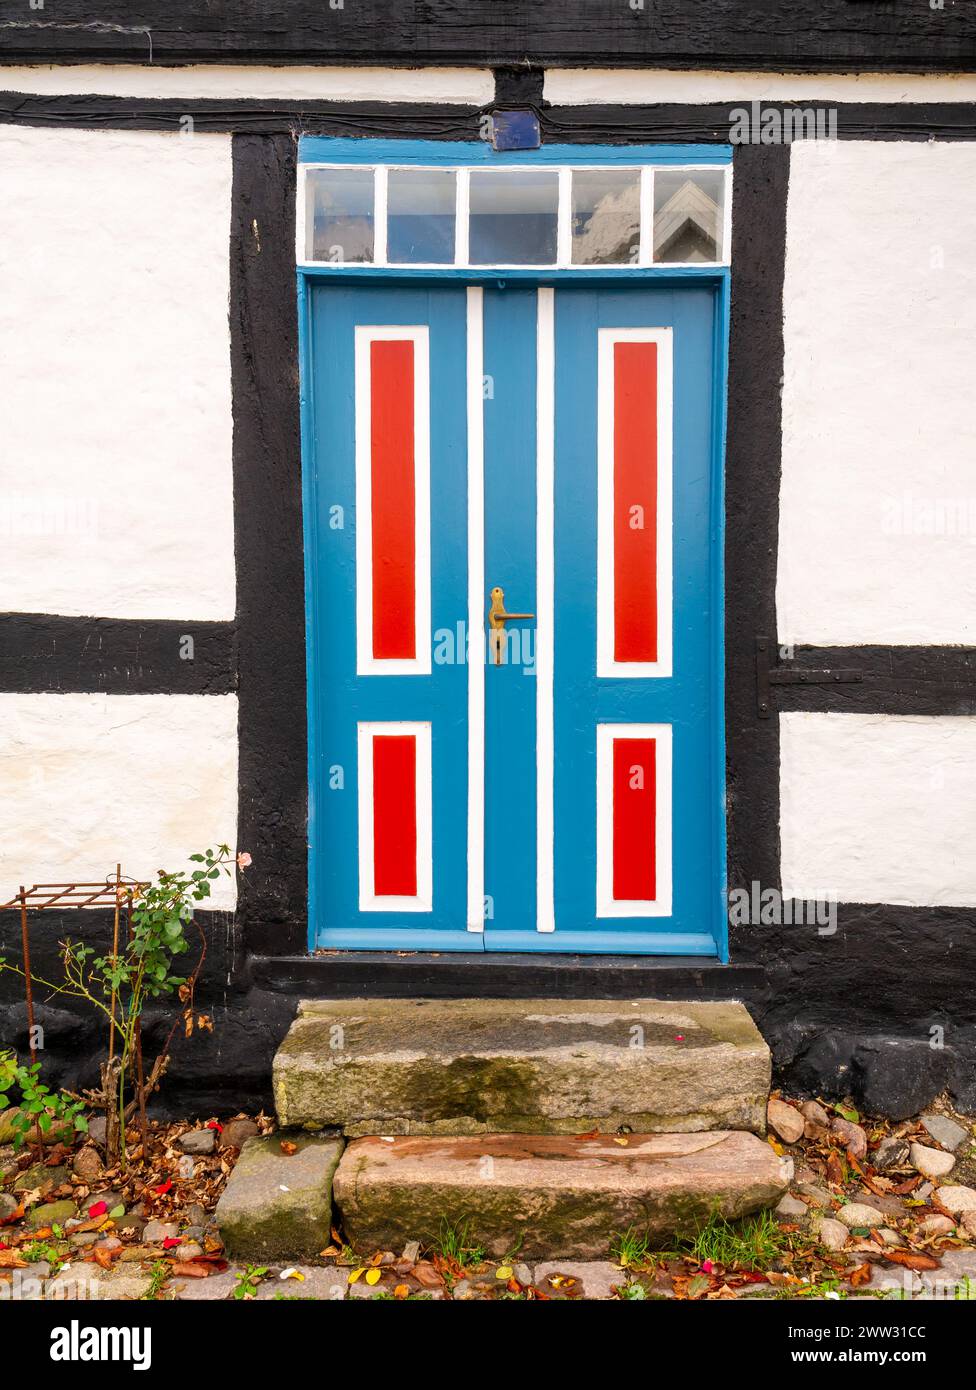 Front view of colorful door of old half-timbered house on Teglgade street in Mariager, Nordjylland, Denmark Stock Photo